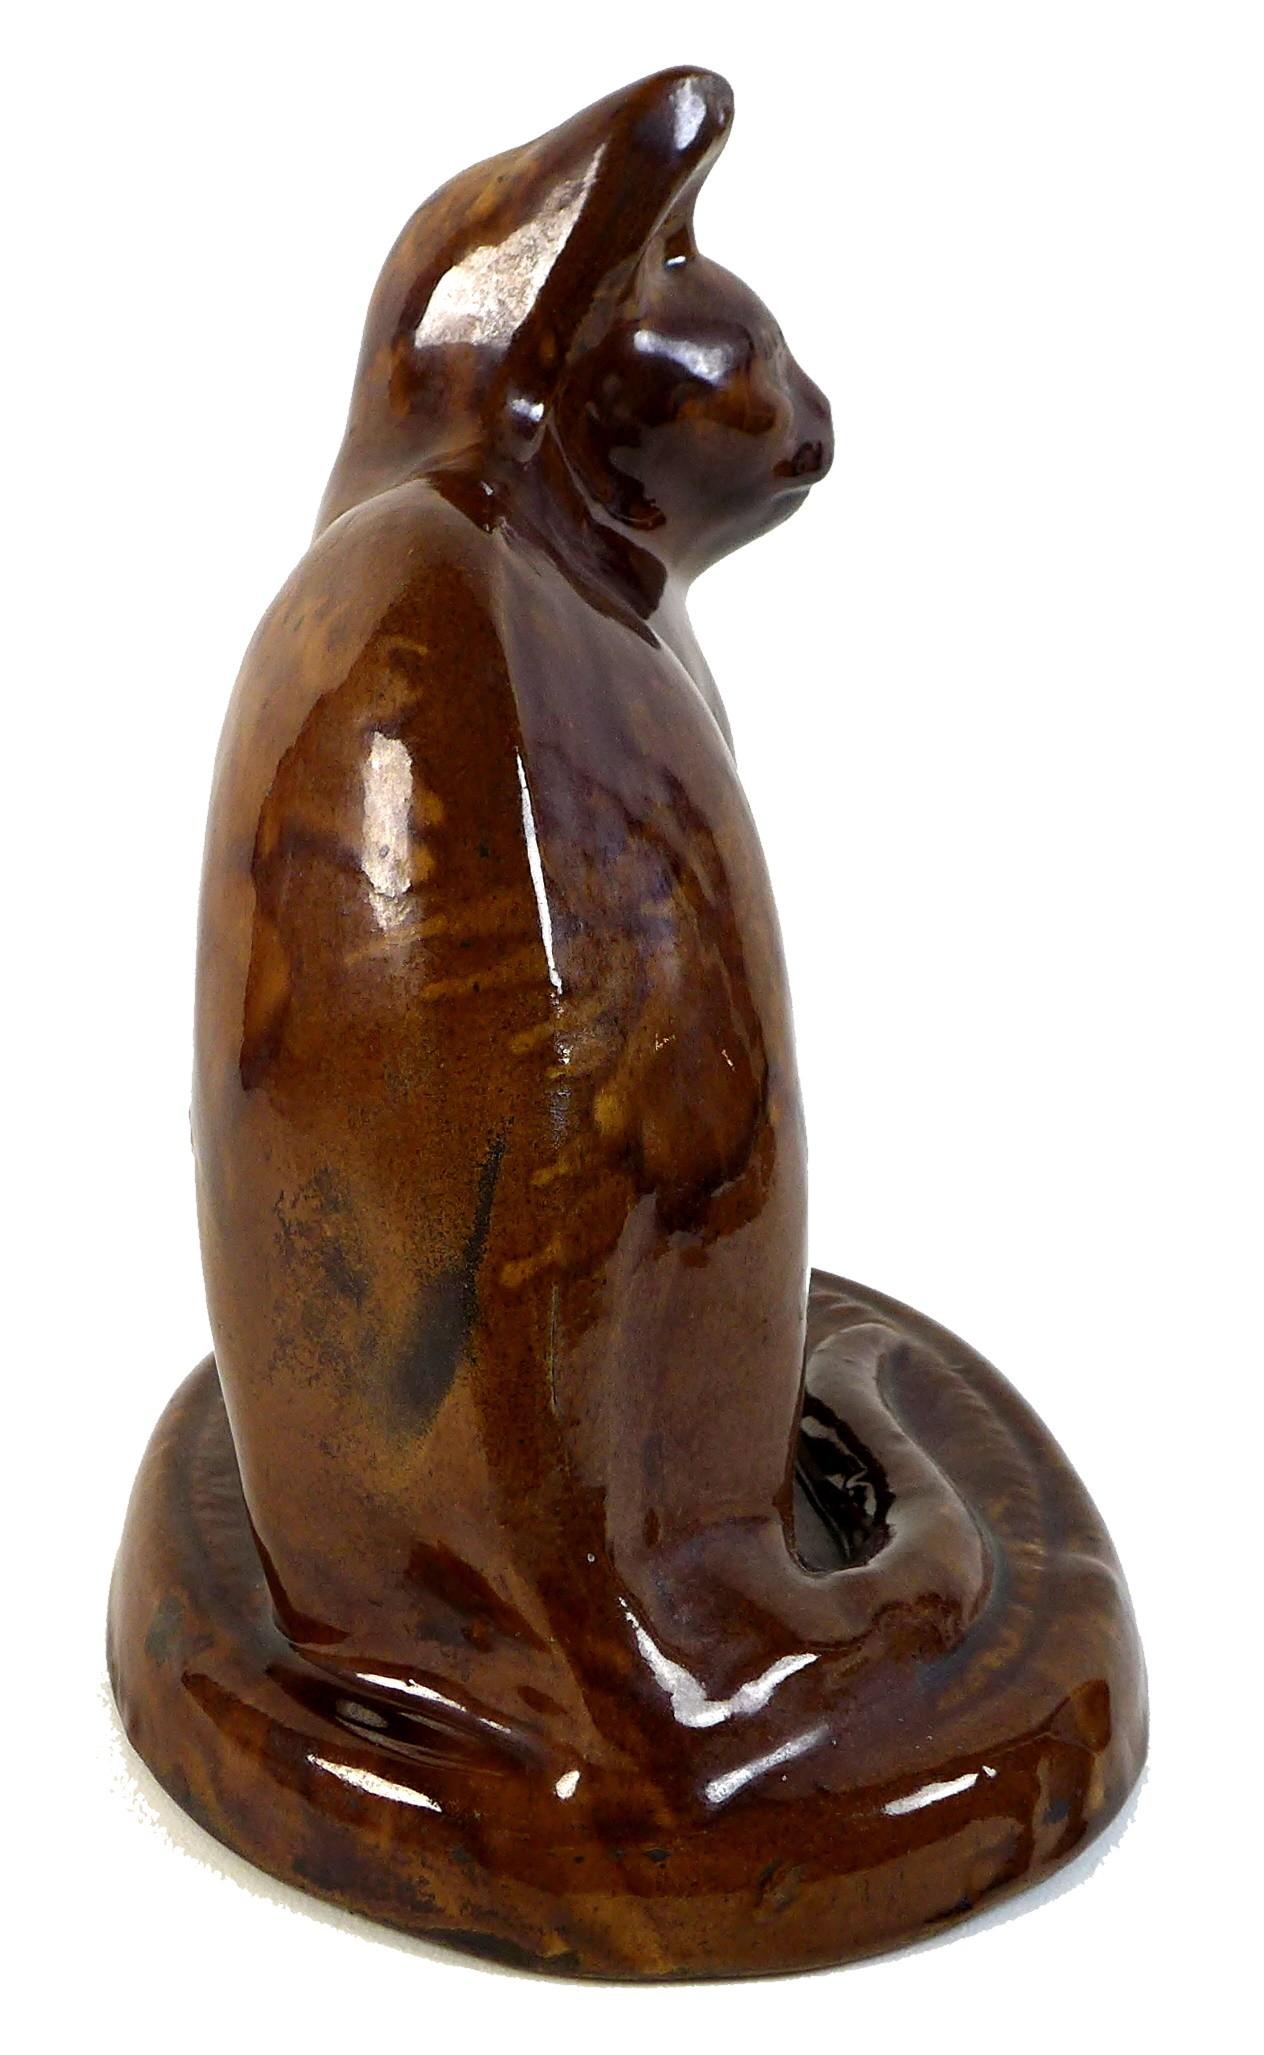 A rare treacle glazed pottery figure, mid to late 19th century, probably Canney Hill Pottery, Bishop - Image 5 of 10